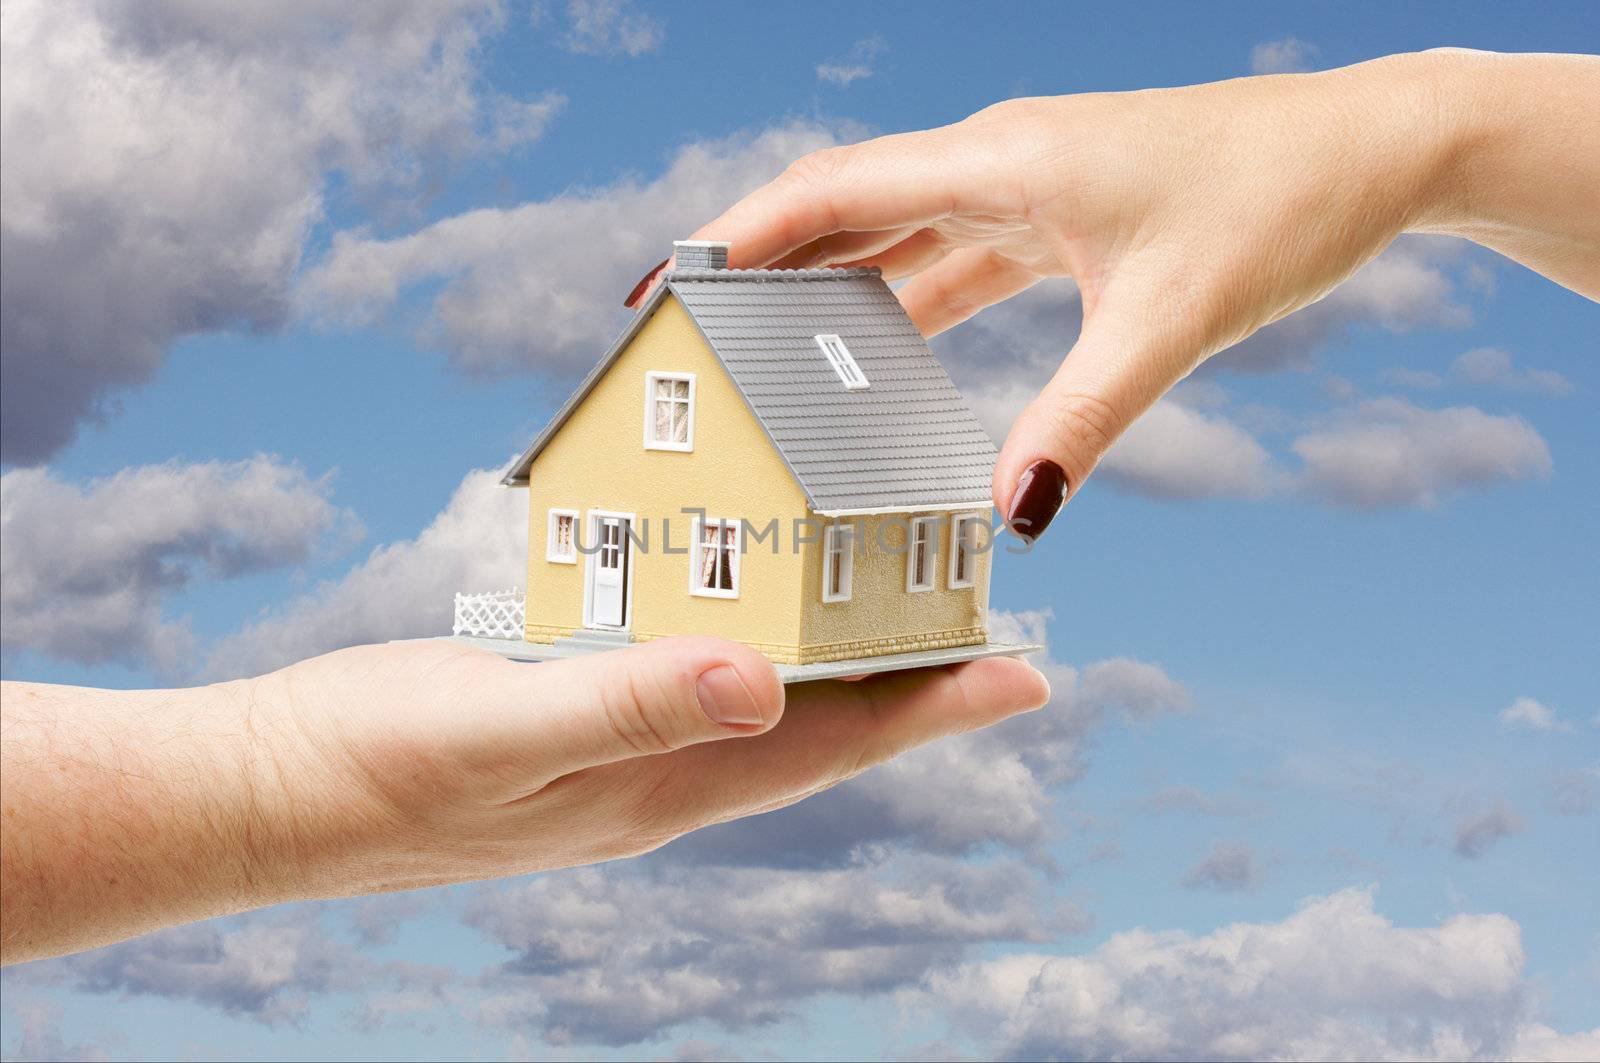 Female hand reaching for a house on a partly cloudy sky background.